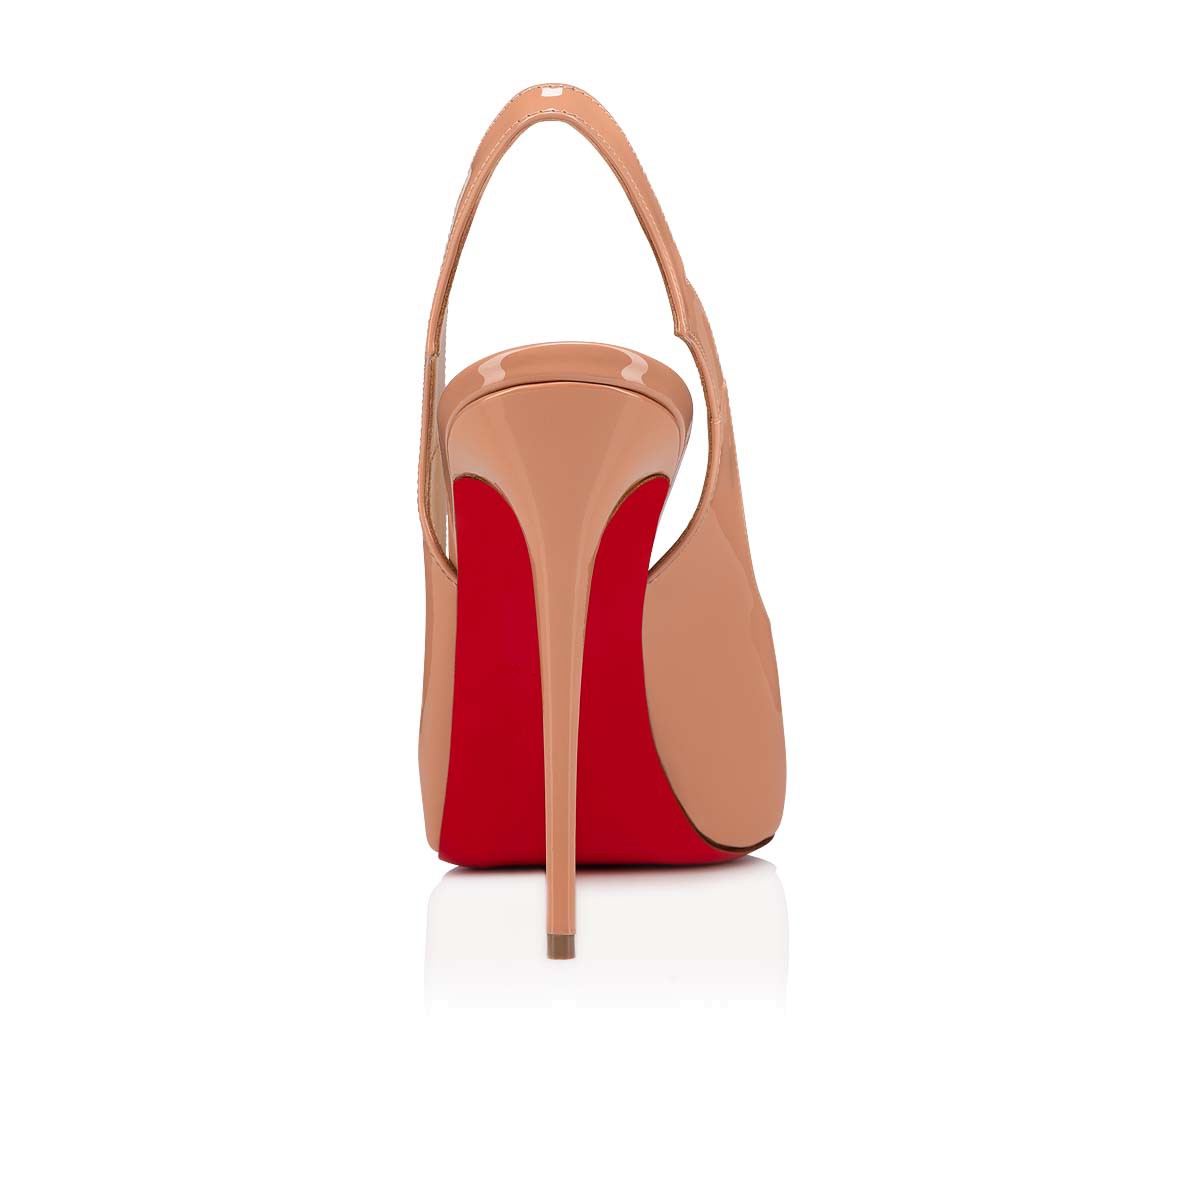 Shoes - Hot Chick Sling Alta - Christian Louboutin